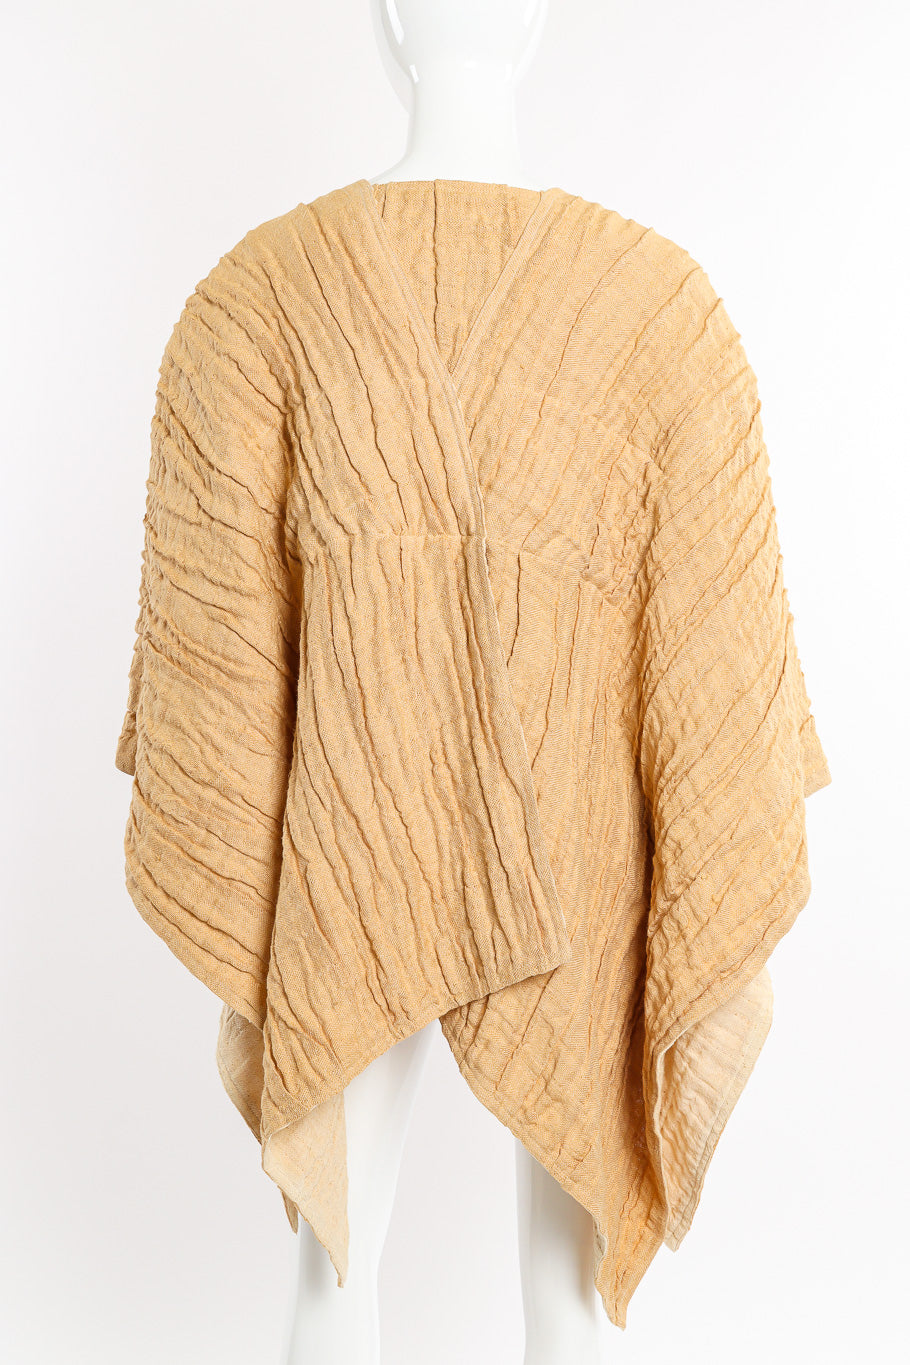 Issey Miyake Flax Linen Pleated Kimono back view on mannequin @Recessla